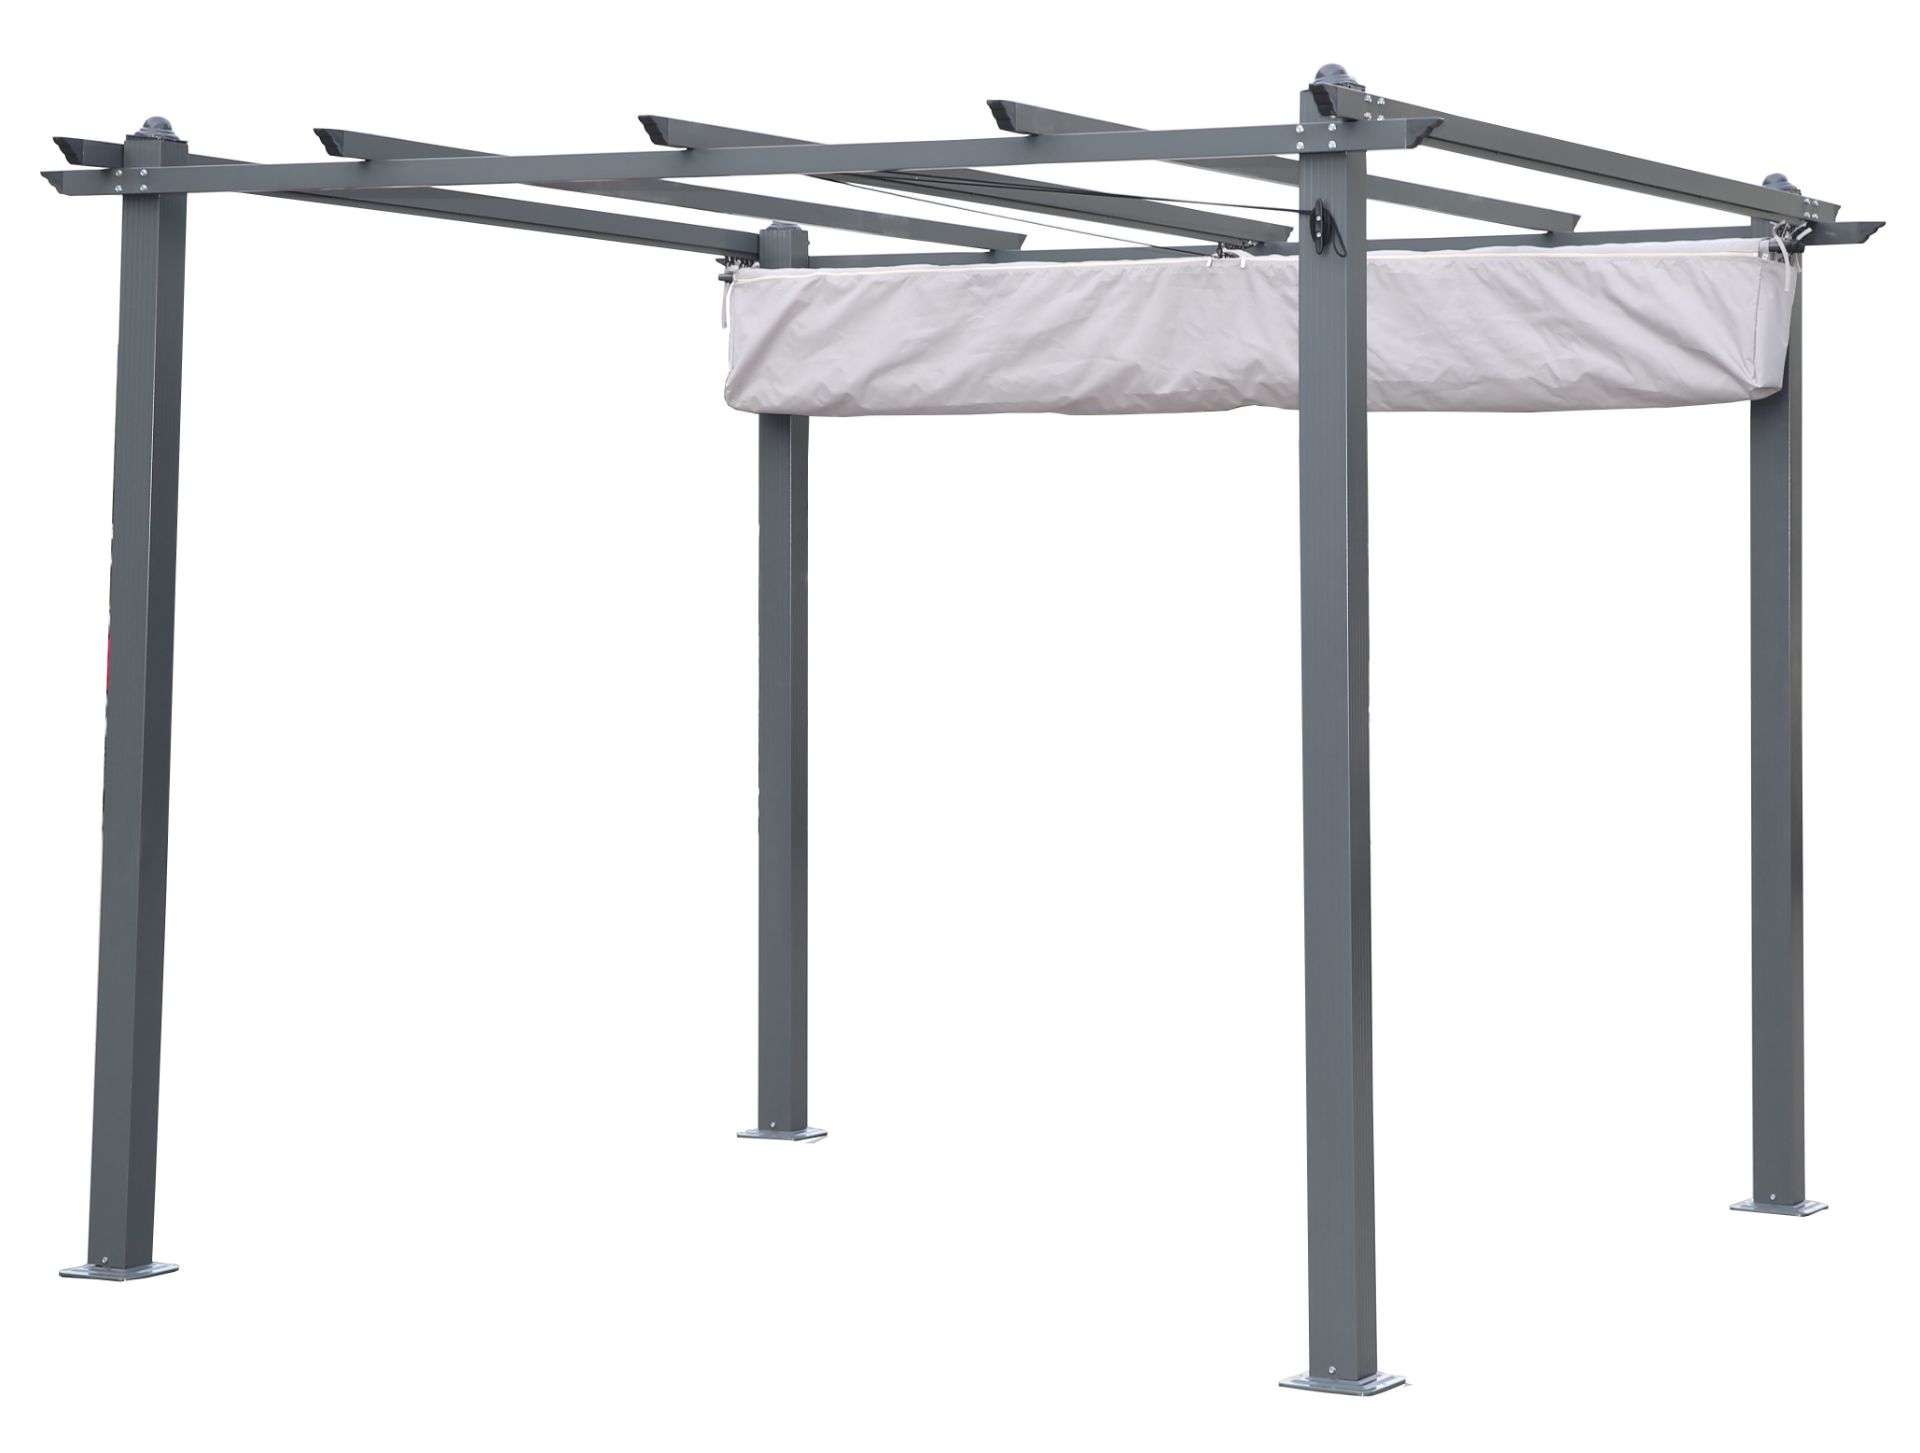 V Brand New 3m x 3m Aluminium Charcoal Grey Pergola With Zipped Cover - Sturdy Design And Folds Back - Image 2 of 2